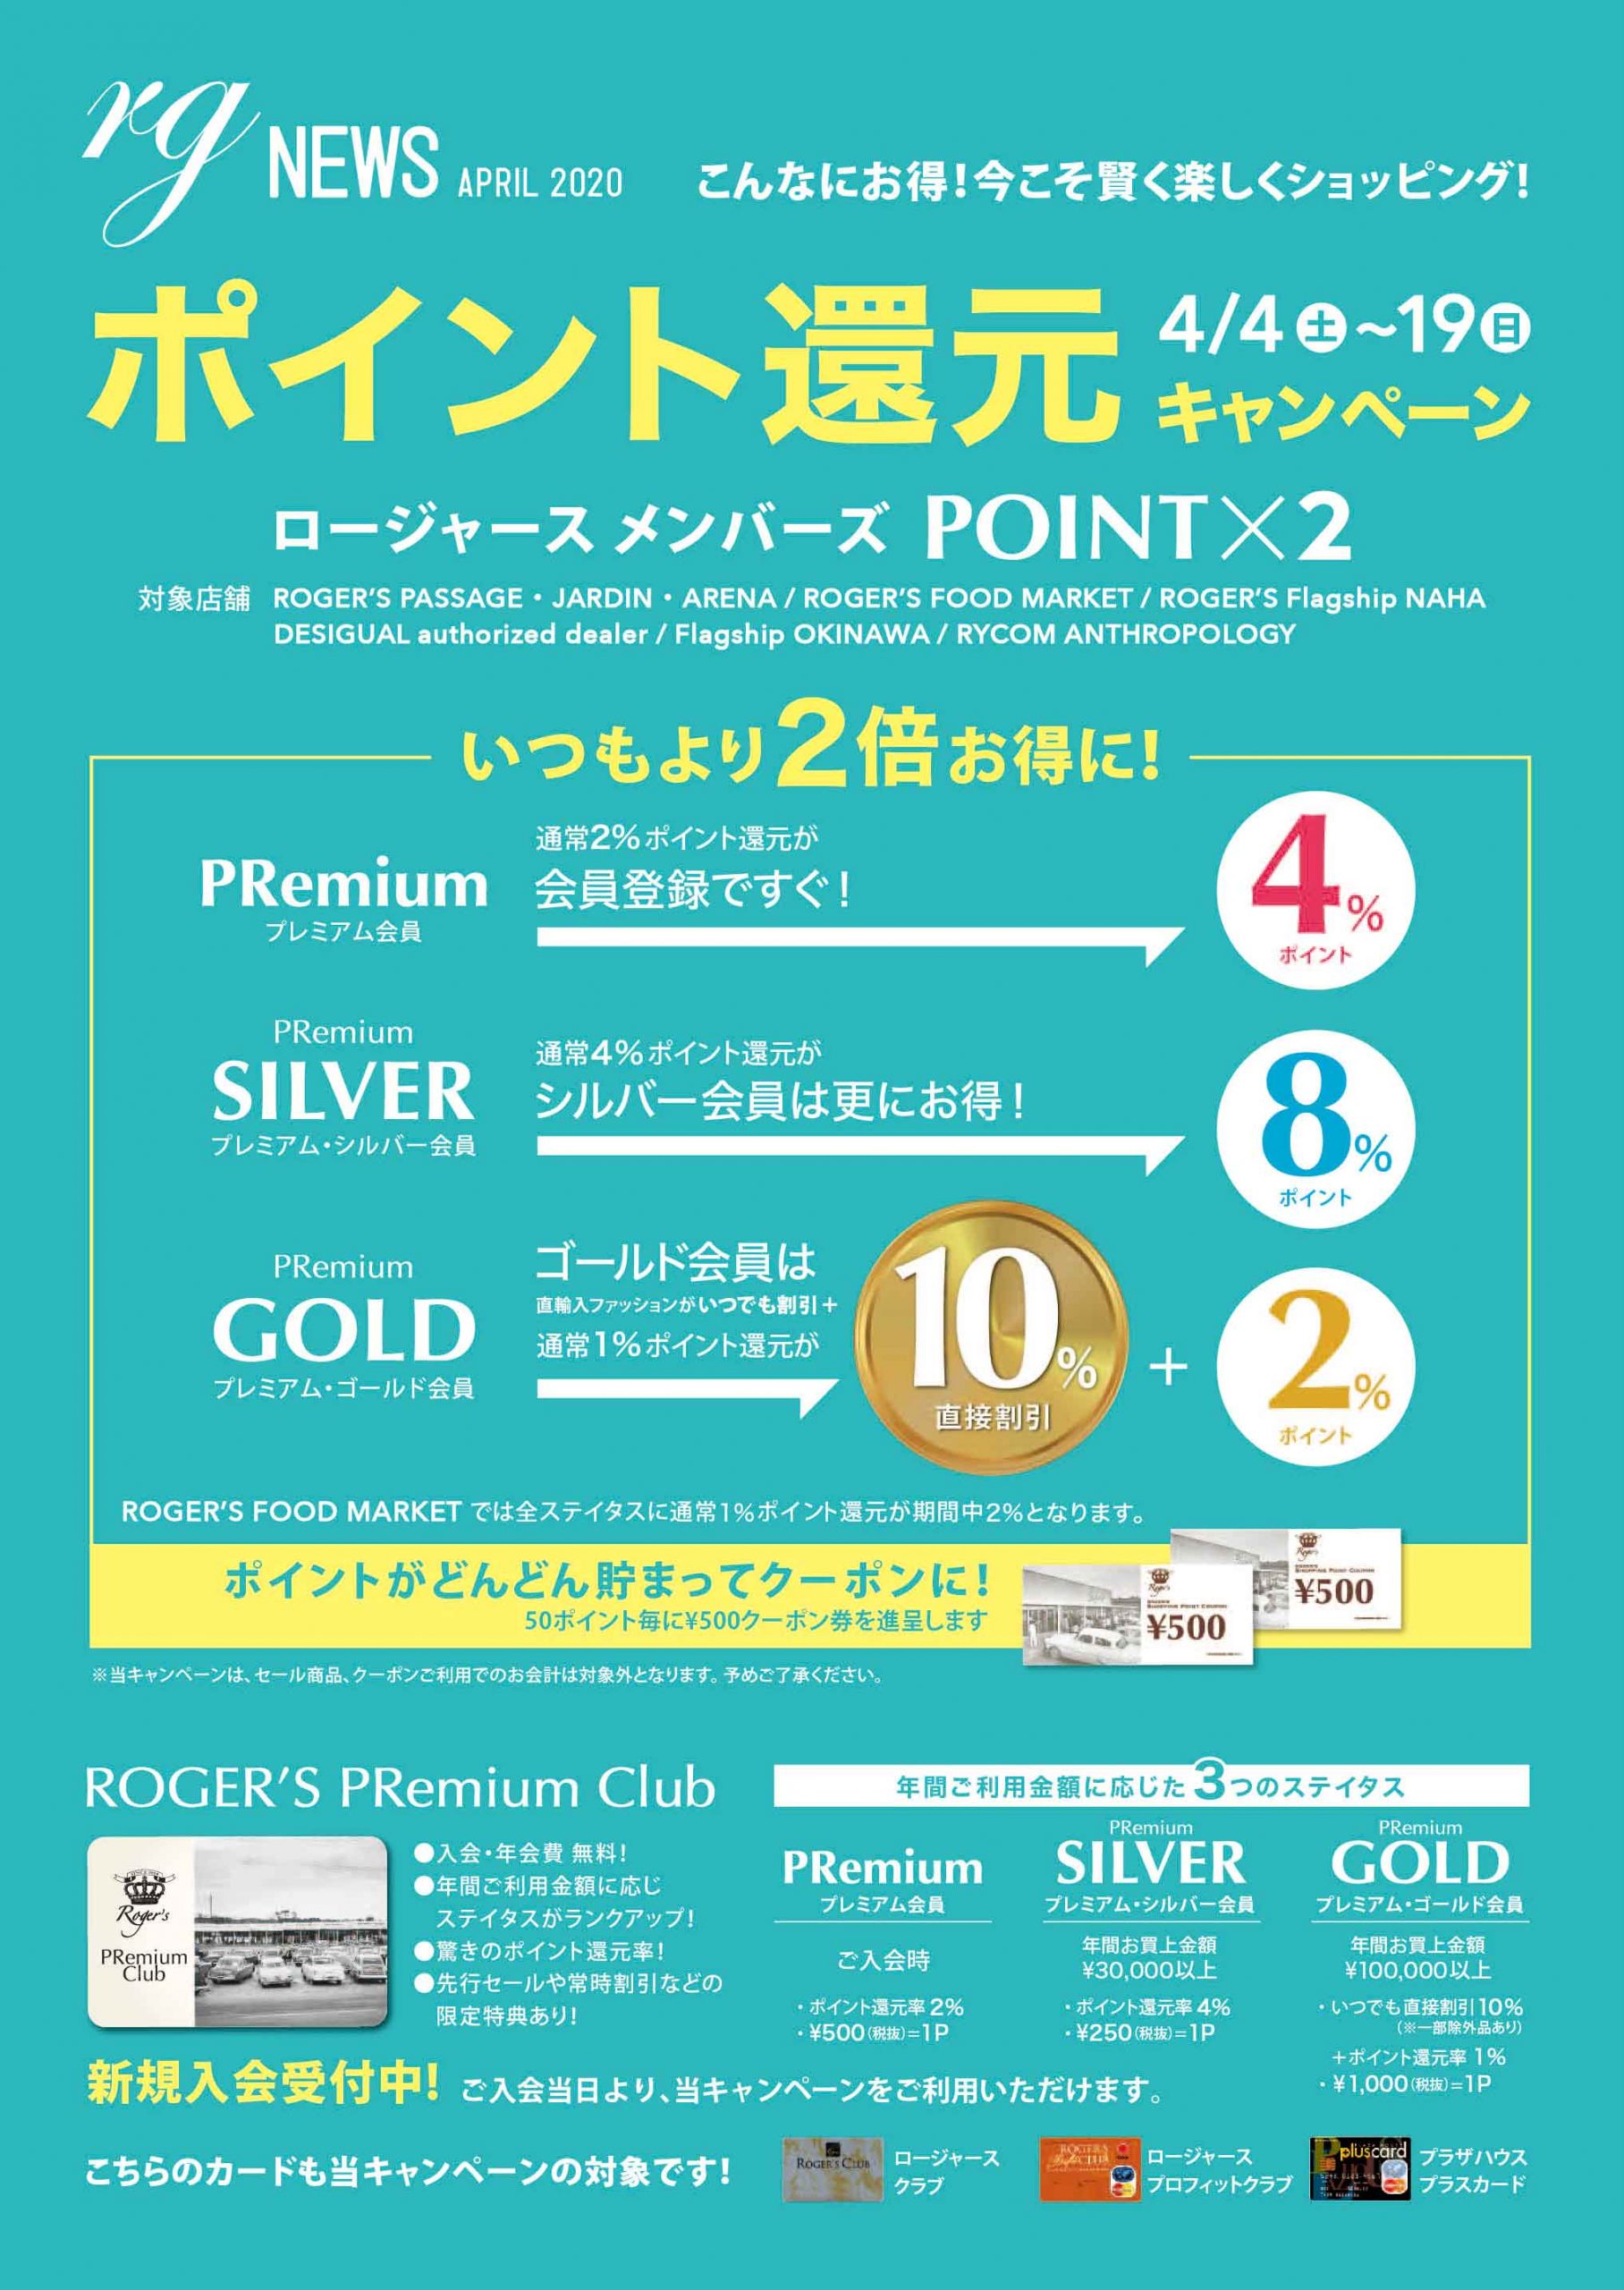 ROGER'S MEMBERS POINT X 2 CAMPAIGN お得に楽しくショッピング! 4/19までポイント2倍還元!